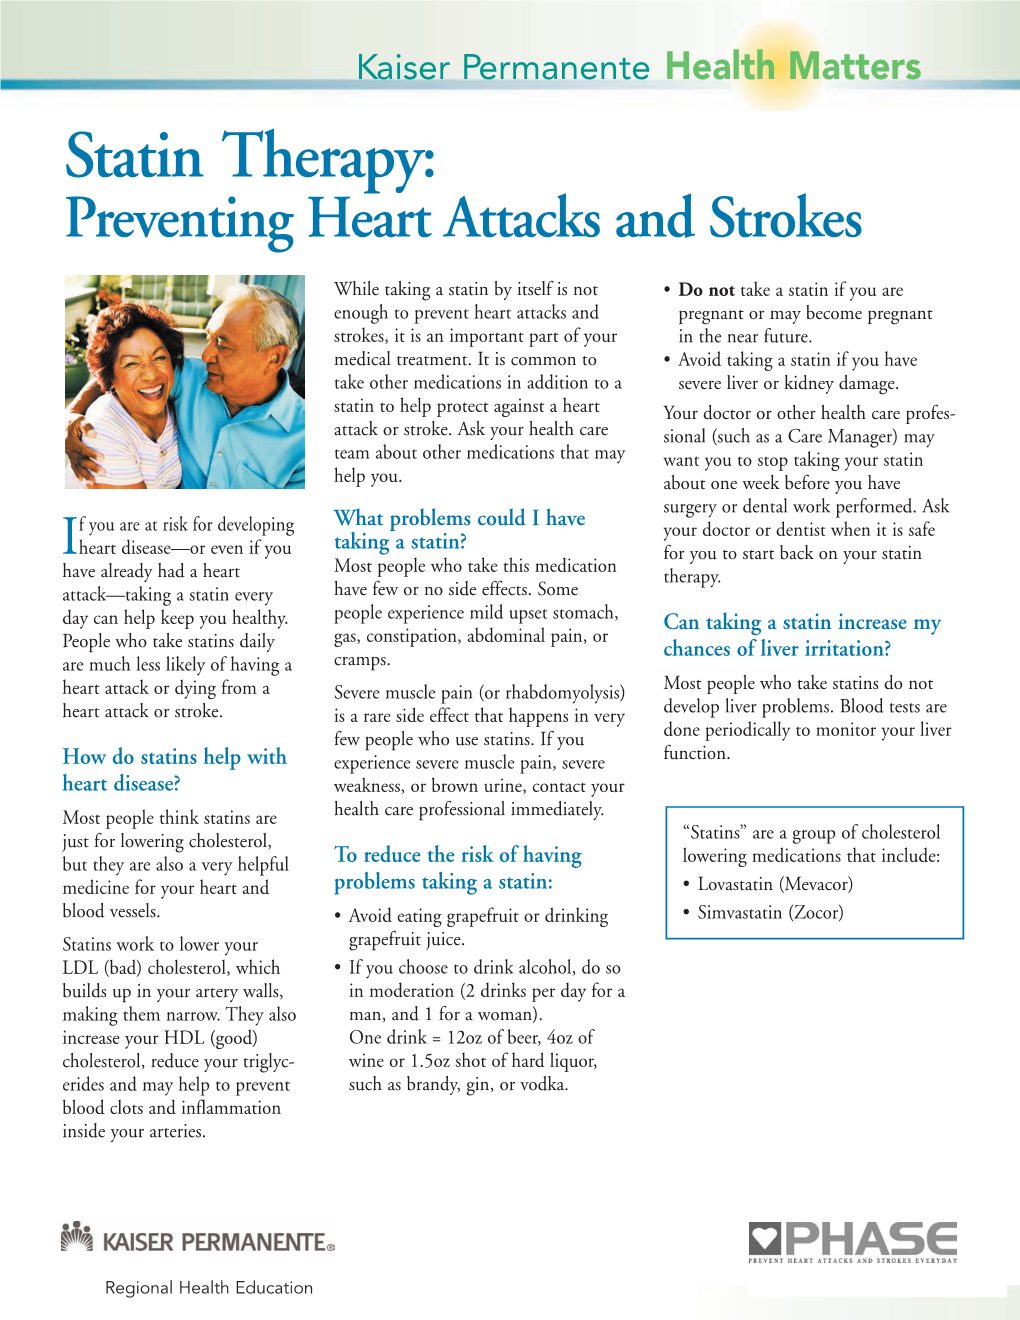 Statin Therapy: Preventing Heart Attacks and Strokes